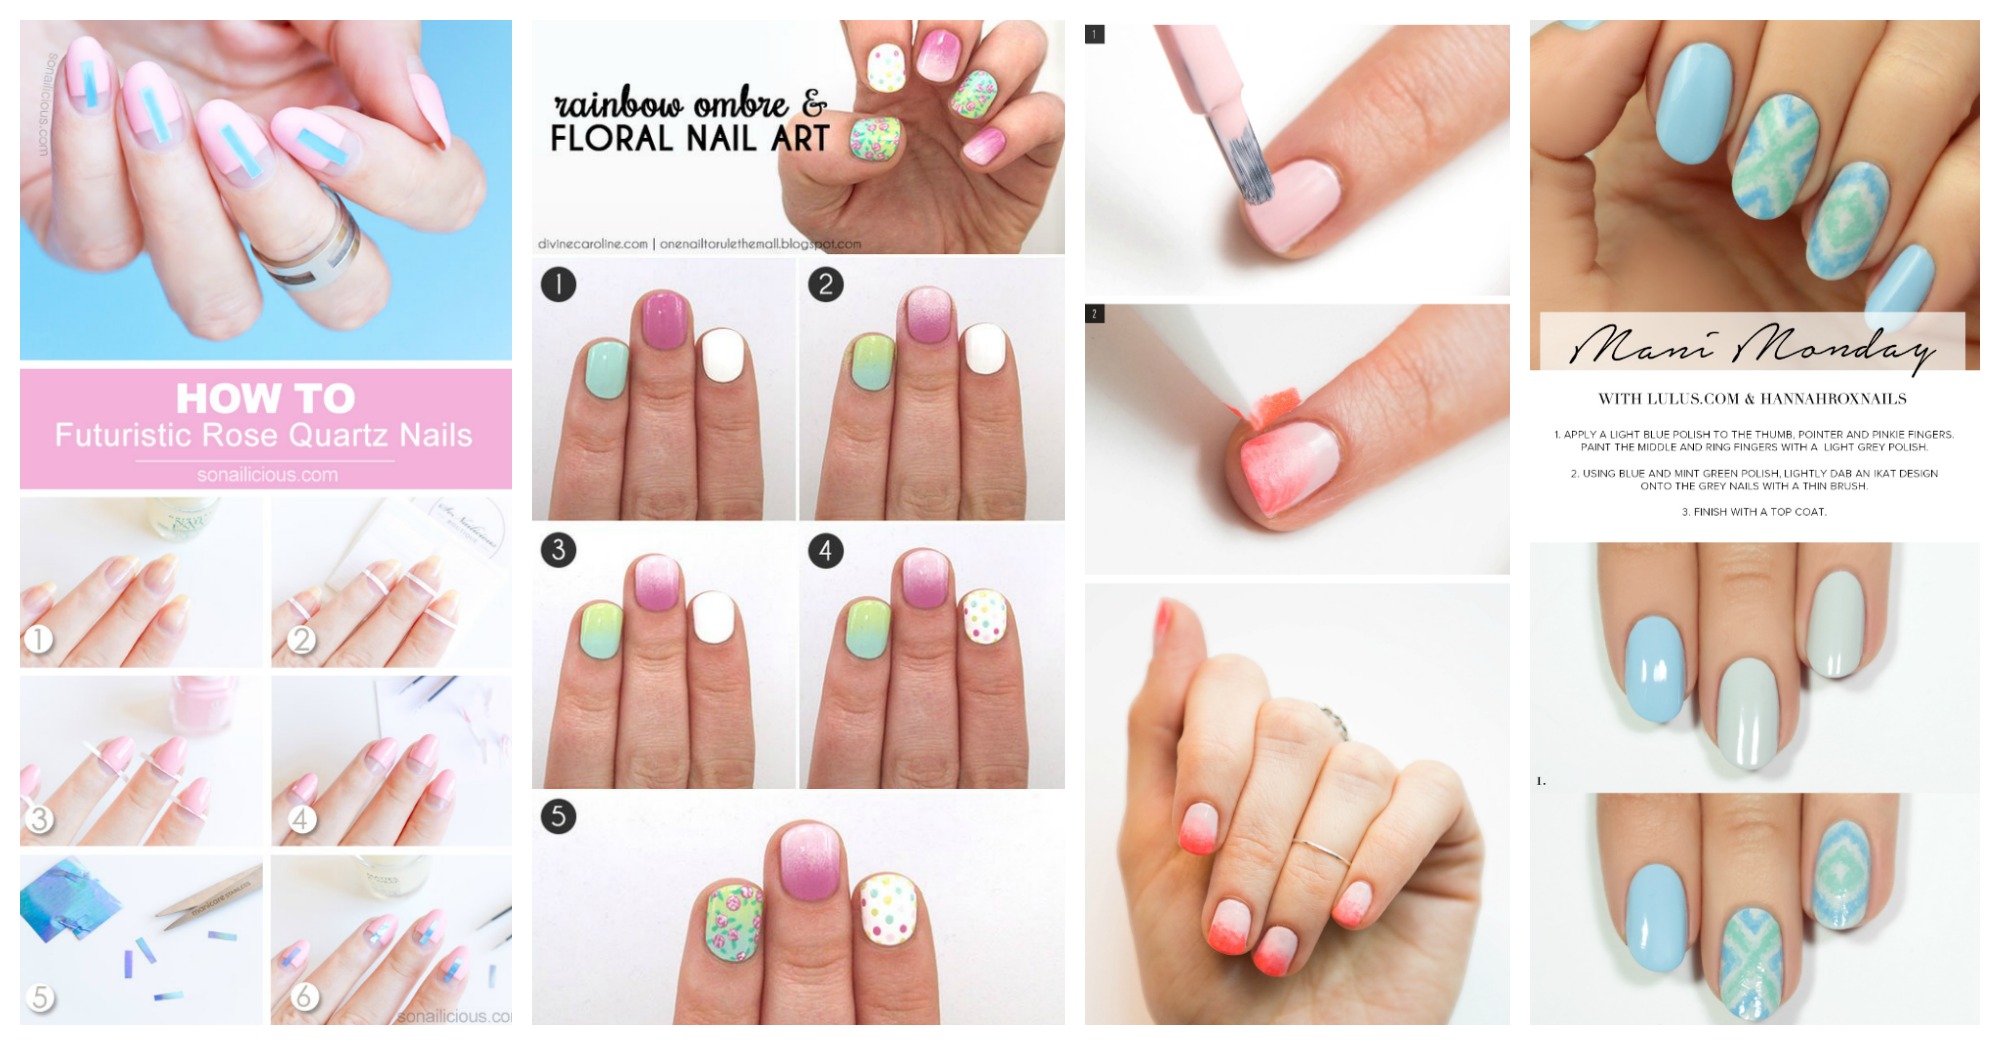 6. Step-by-Step Nail Art Tutorials for Beginners - wide 7